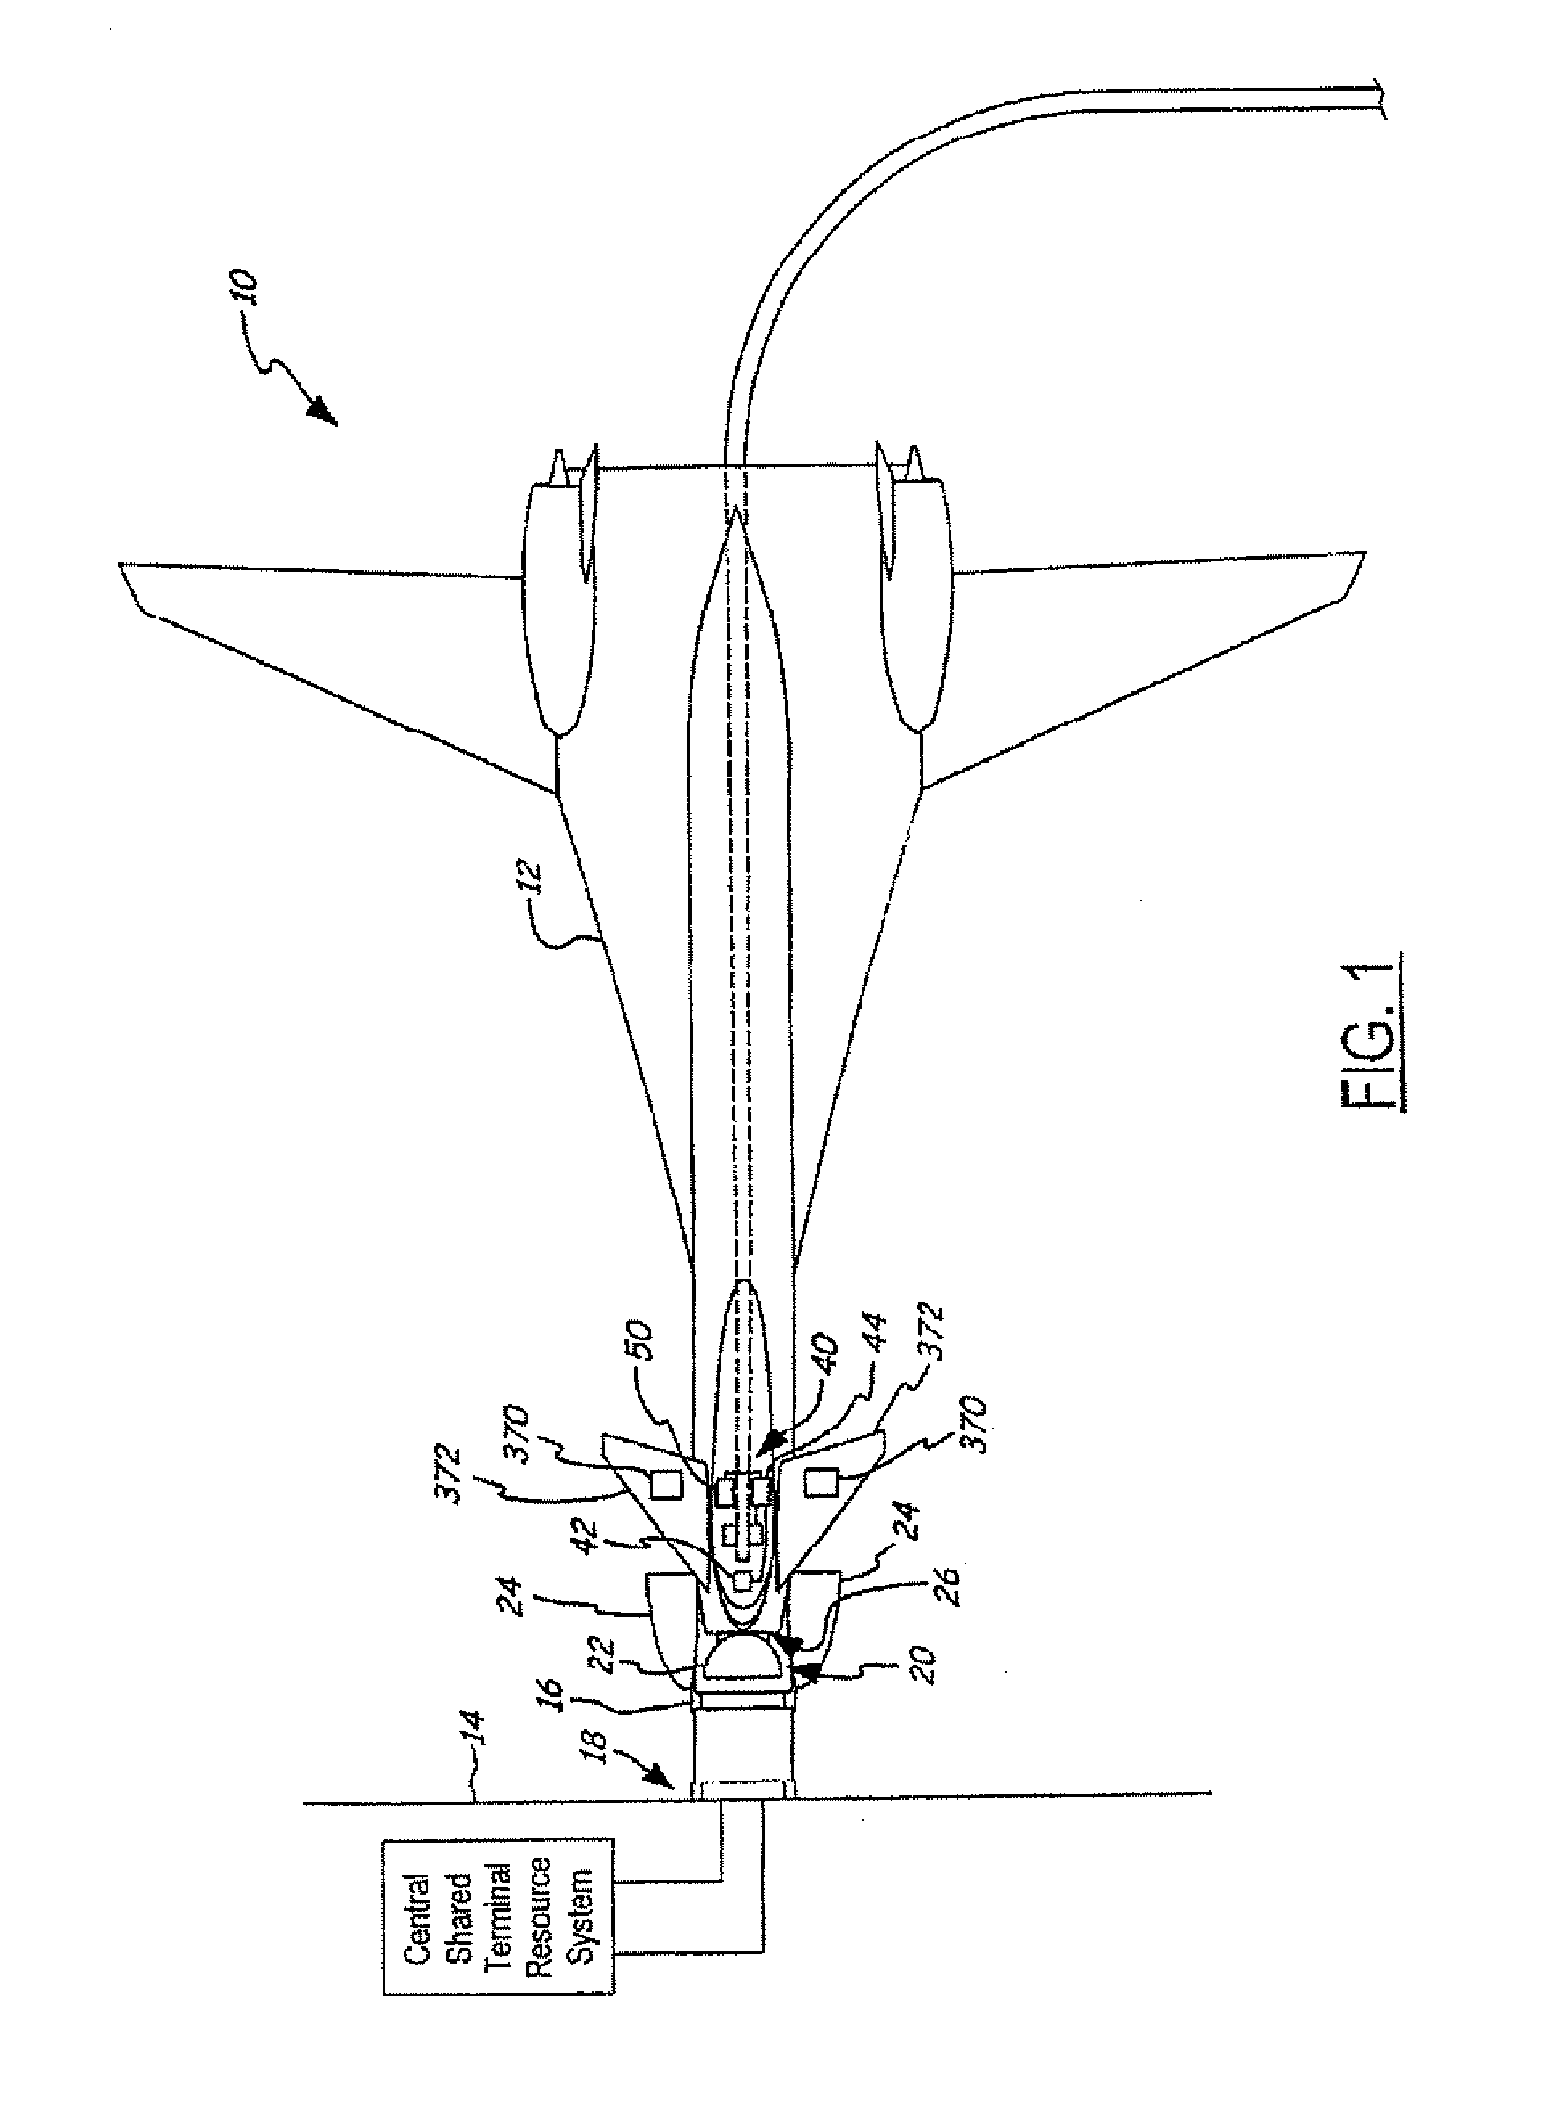 Operational ground support system having automated primary servicing